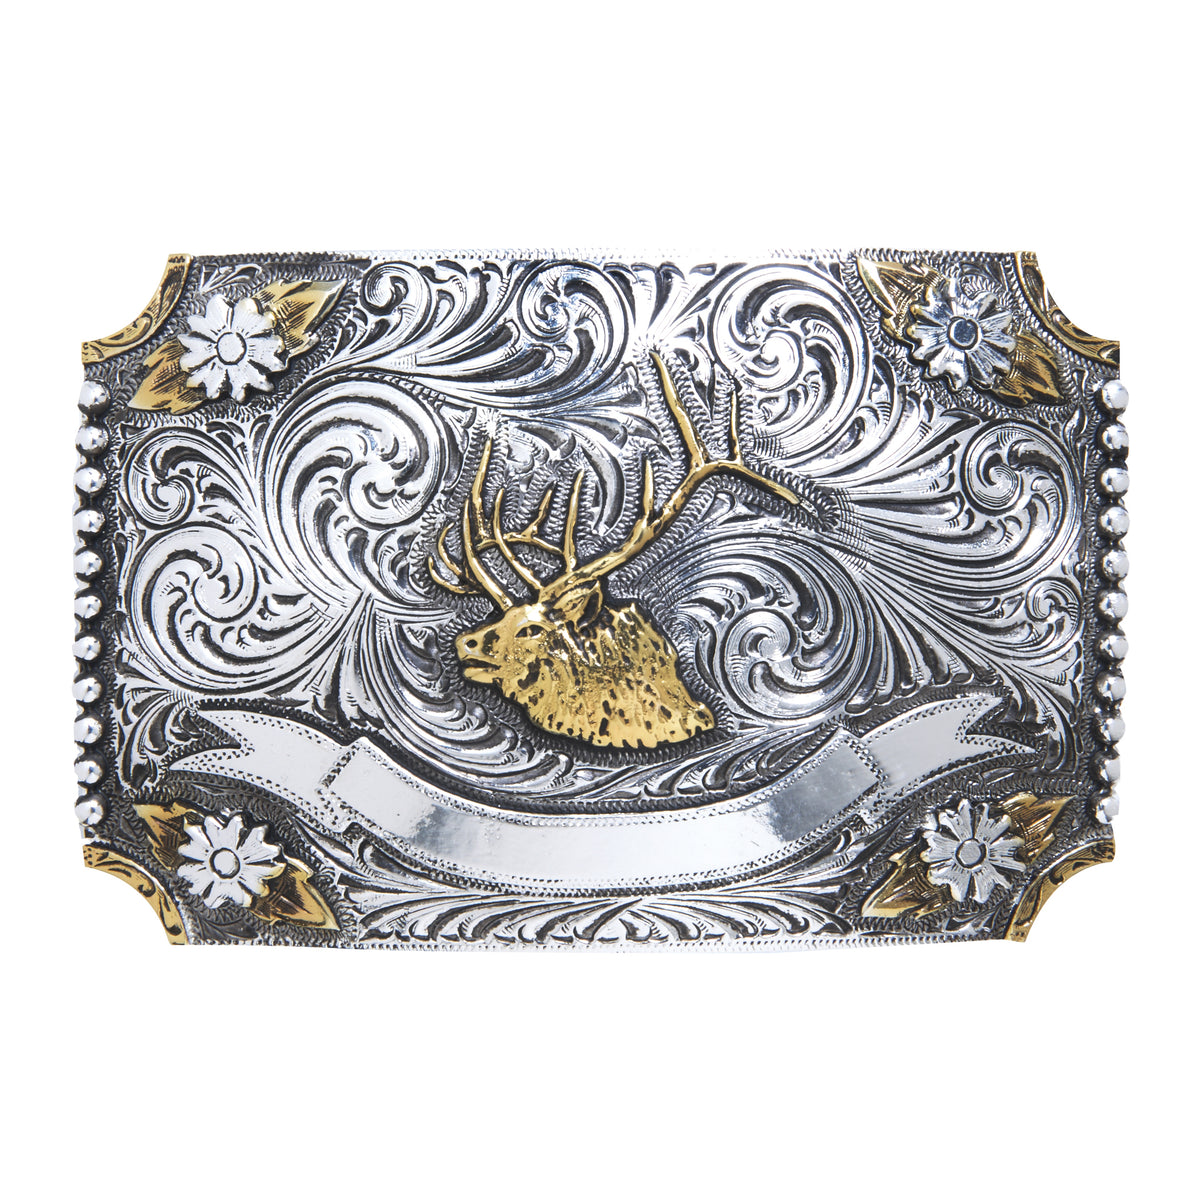 Elk Head with Fancy Flowers and Trophy Banner Buckle